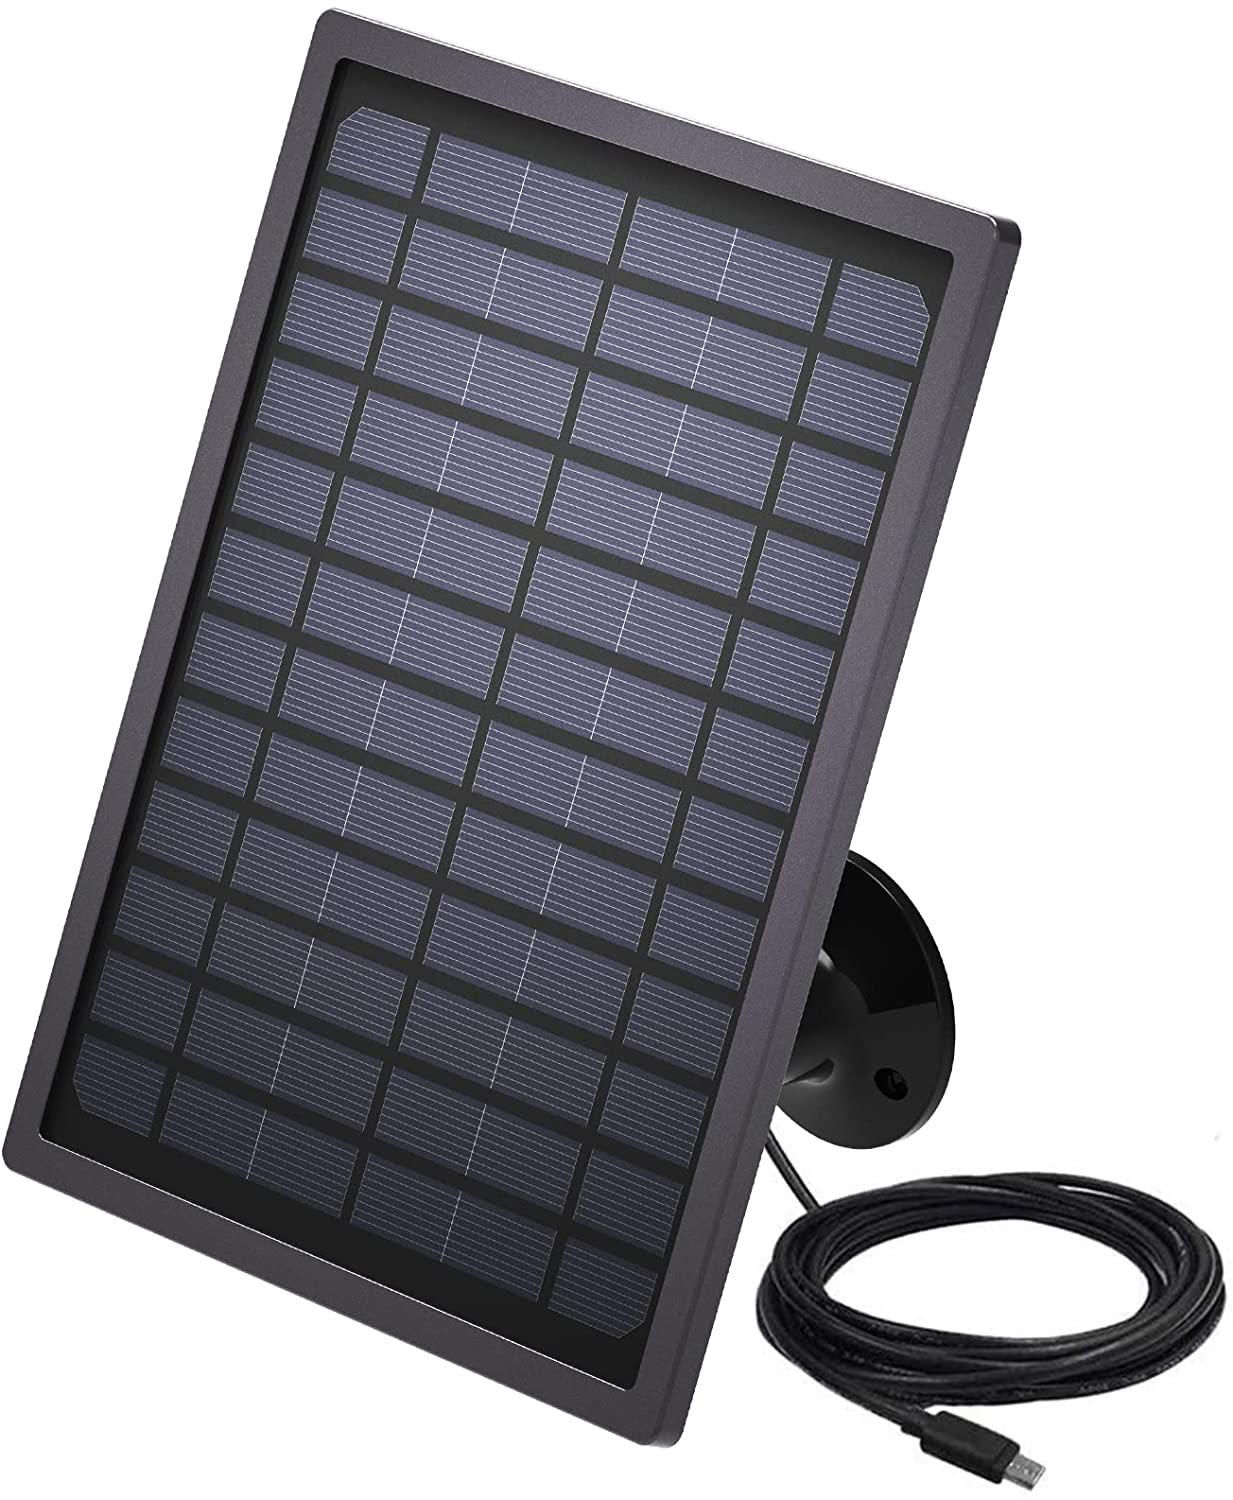 ARENTI Solar Panel Power Supply Designed for Security Outdoor Battery Cameras GO1/VBELL/B1, Waterproof, and Non-Stop Charging (Black)